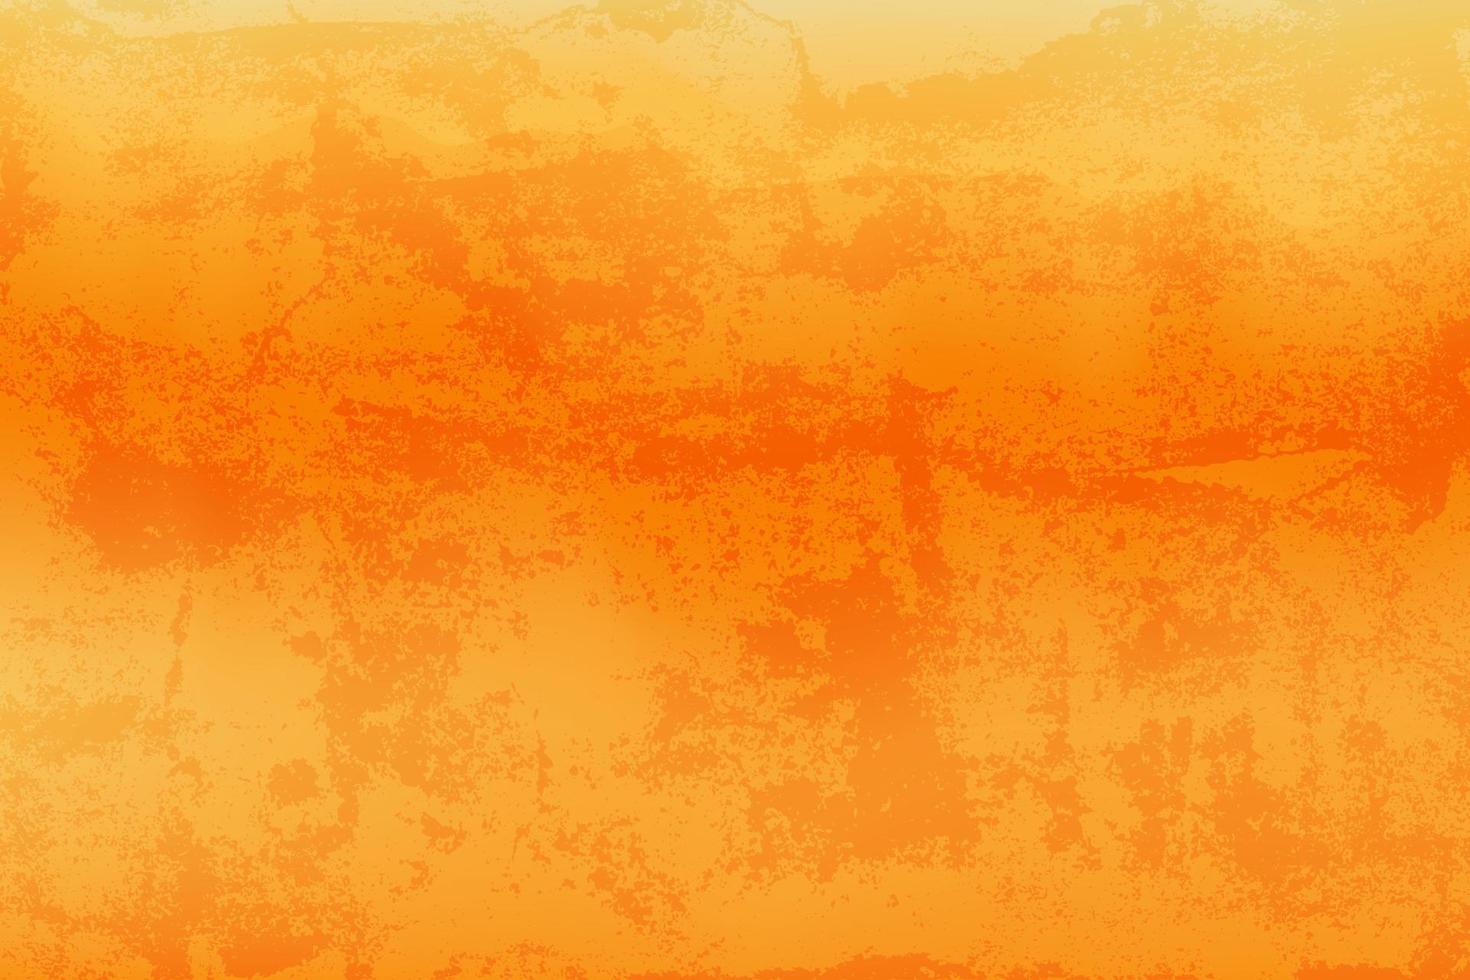 Old wall orange grunge textures and backgrounds, vector illustration